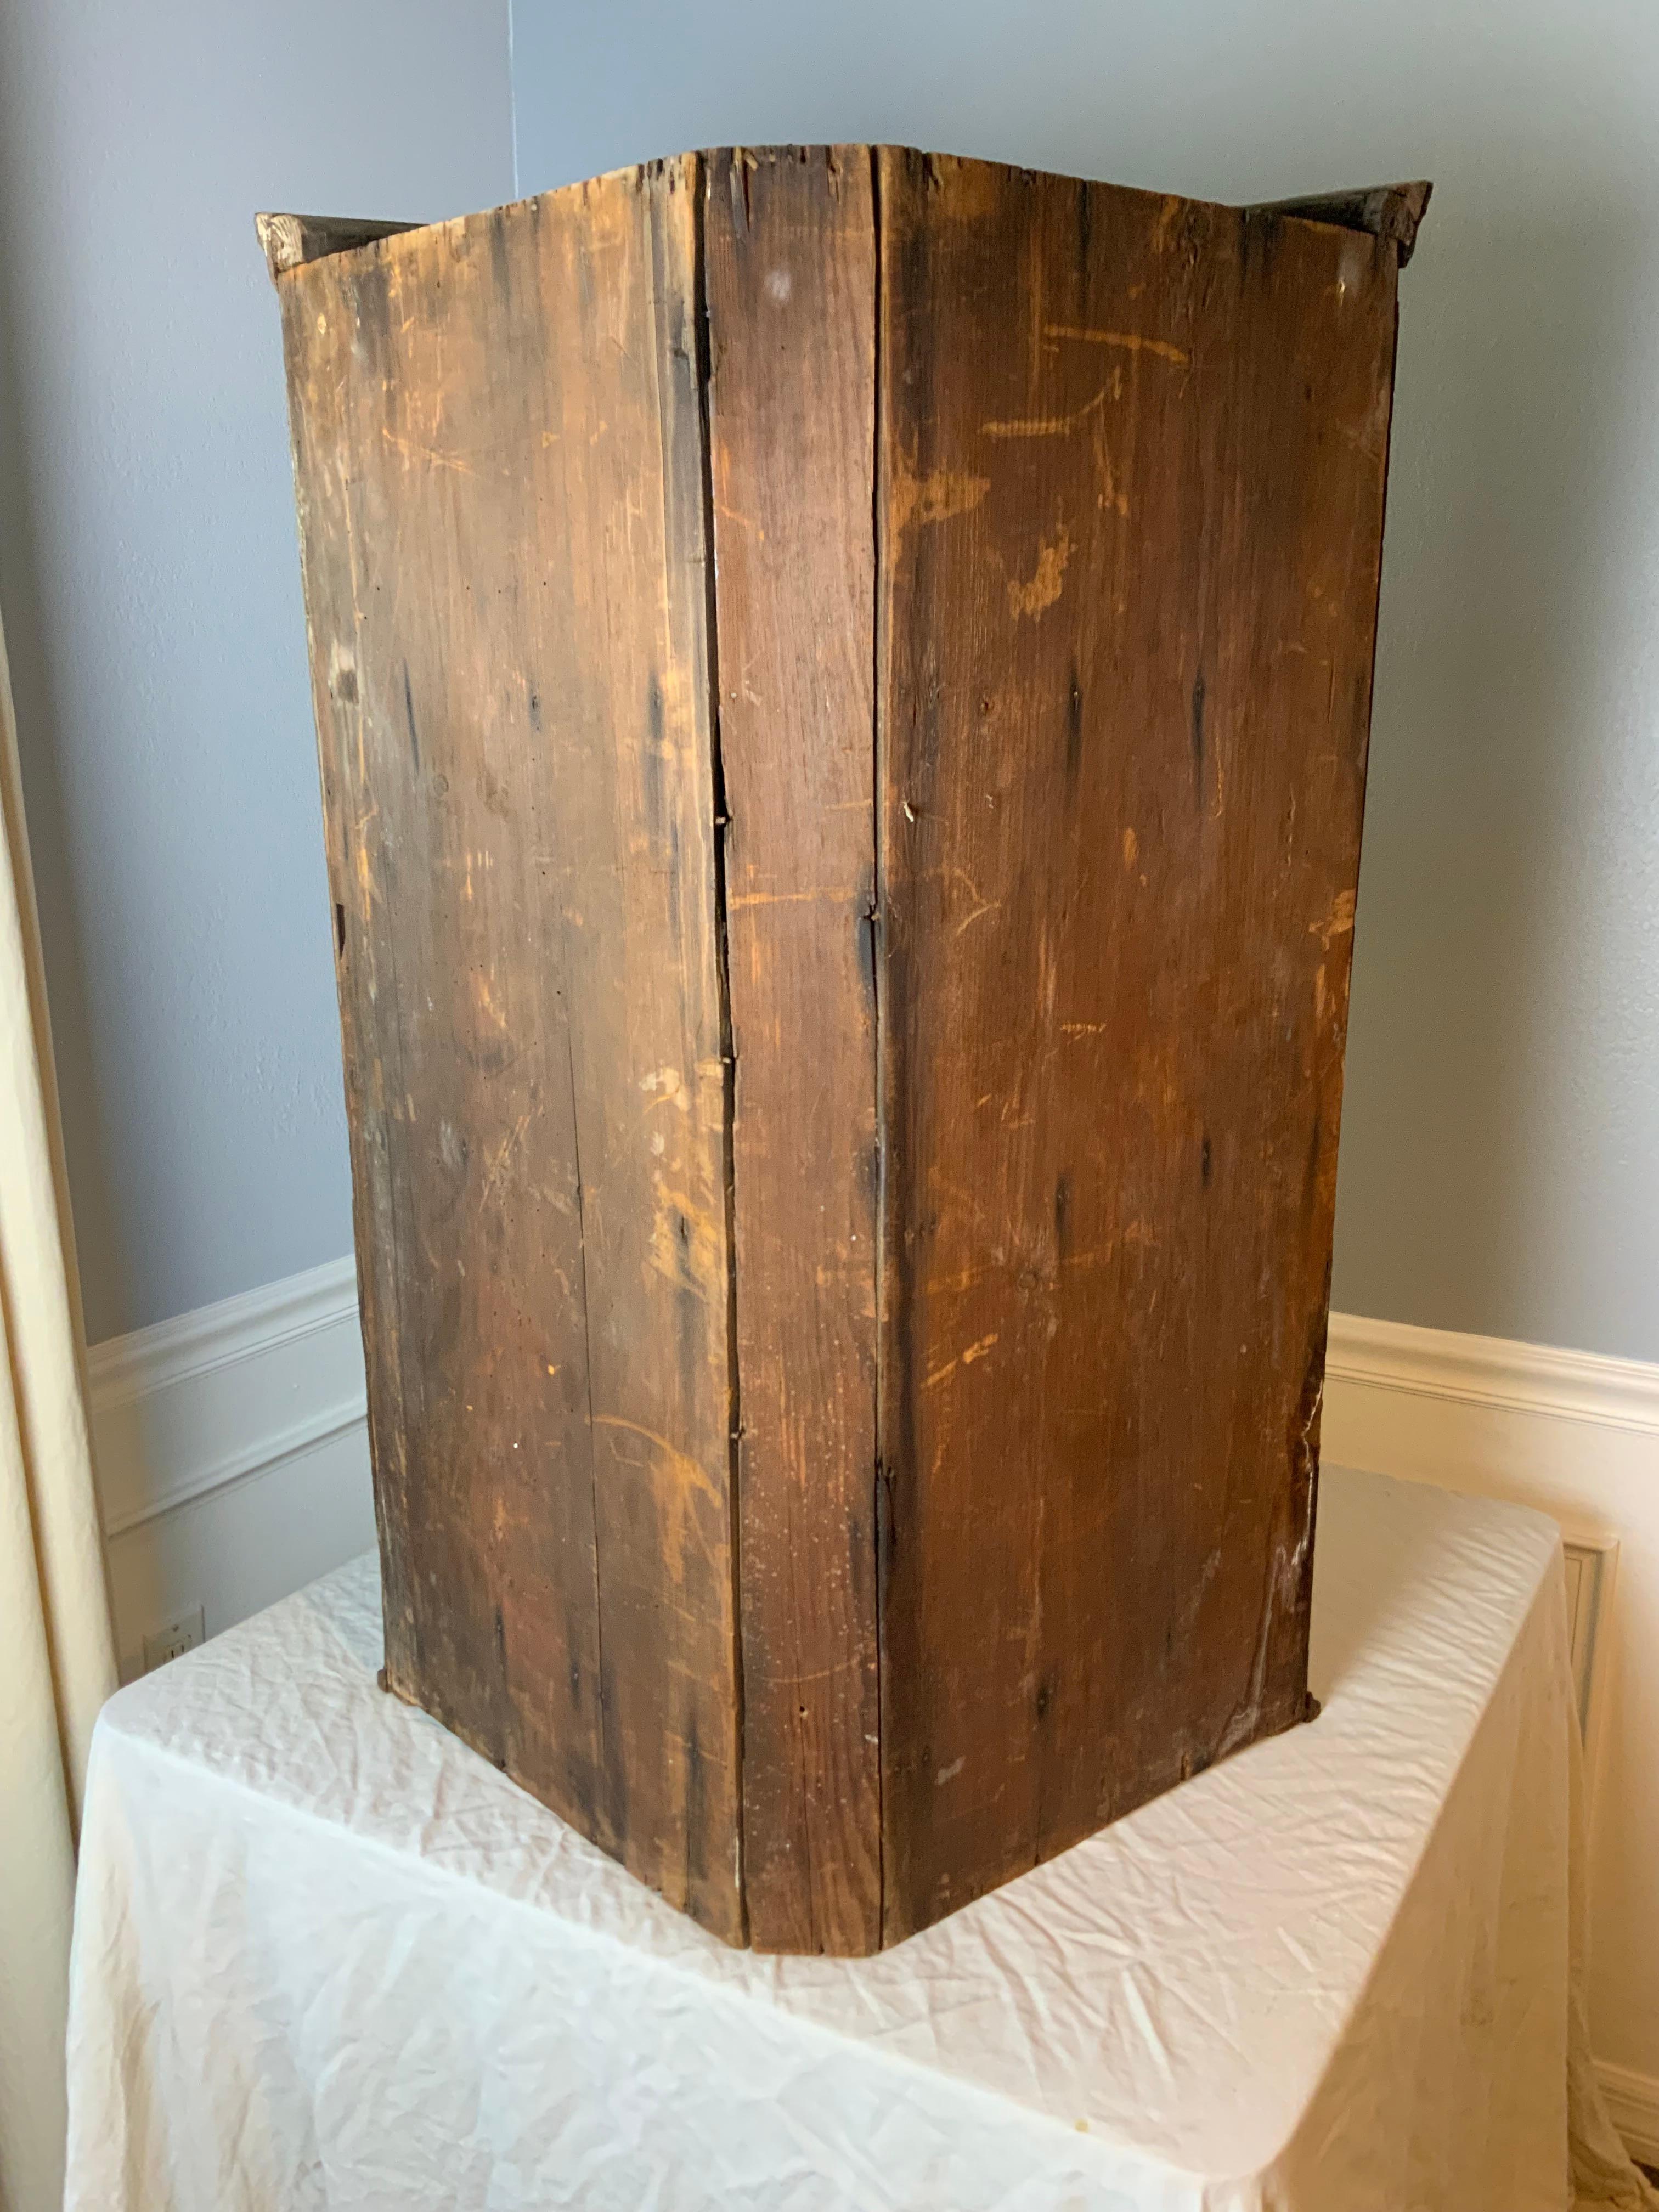 A very nice early Georgian Mahogany hanging corner cupboard with two interior drawers. Very nice aged color and patina to the Mahogany in great condition. There is a hook that holds the left side door and the key works but the door has shrunk over